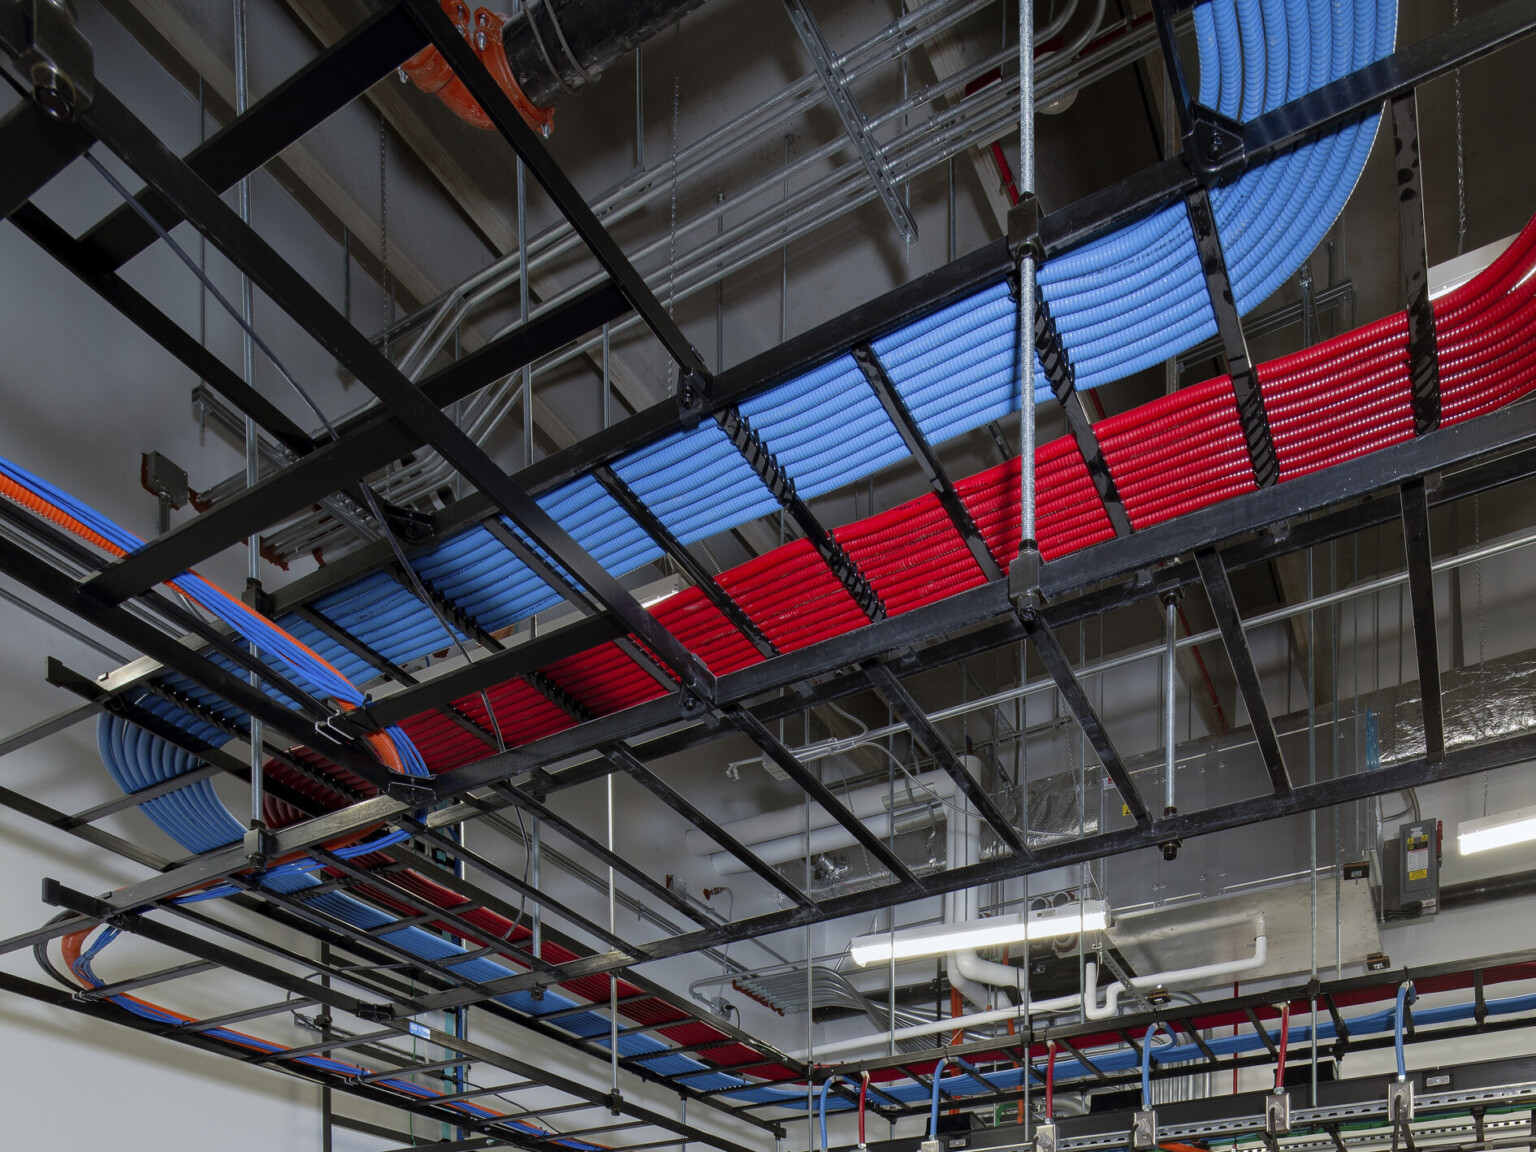 an open ceiling with black orthogonal framing system that contains lighting pendants, pipes, metallic and red and blue tubes